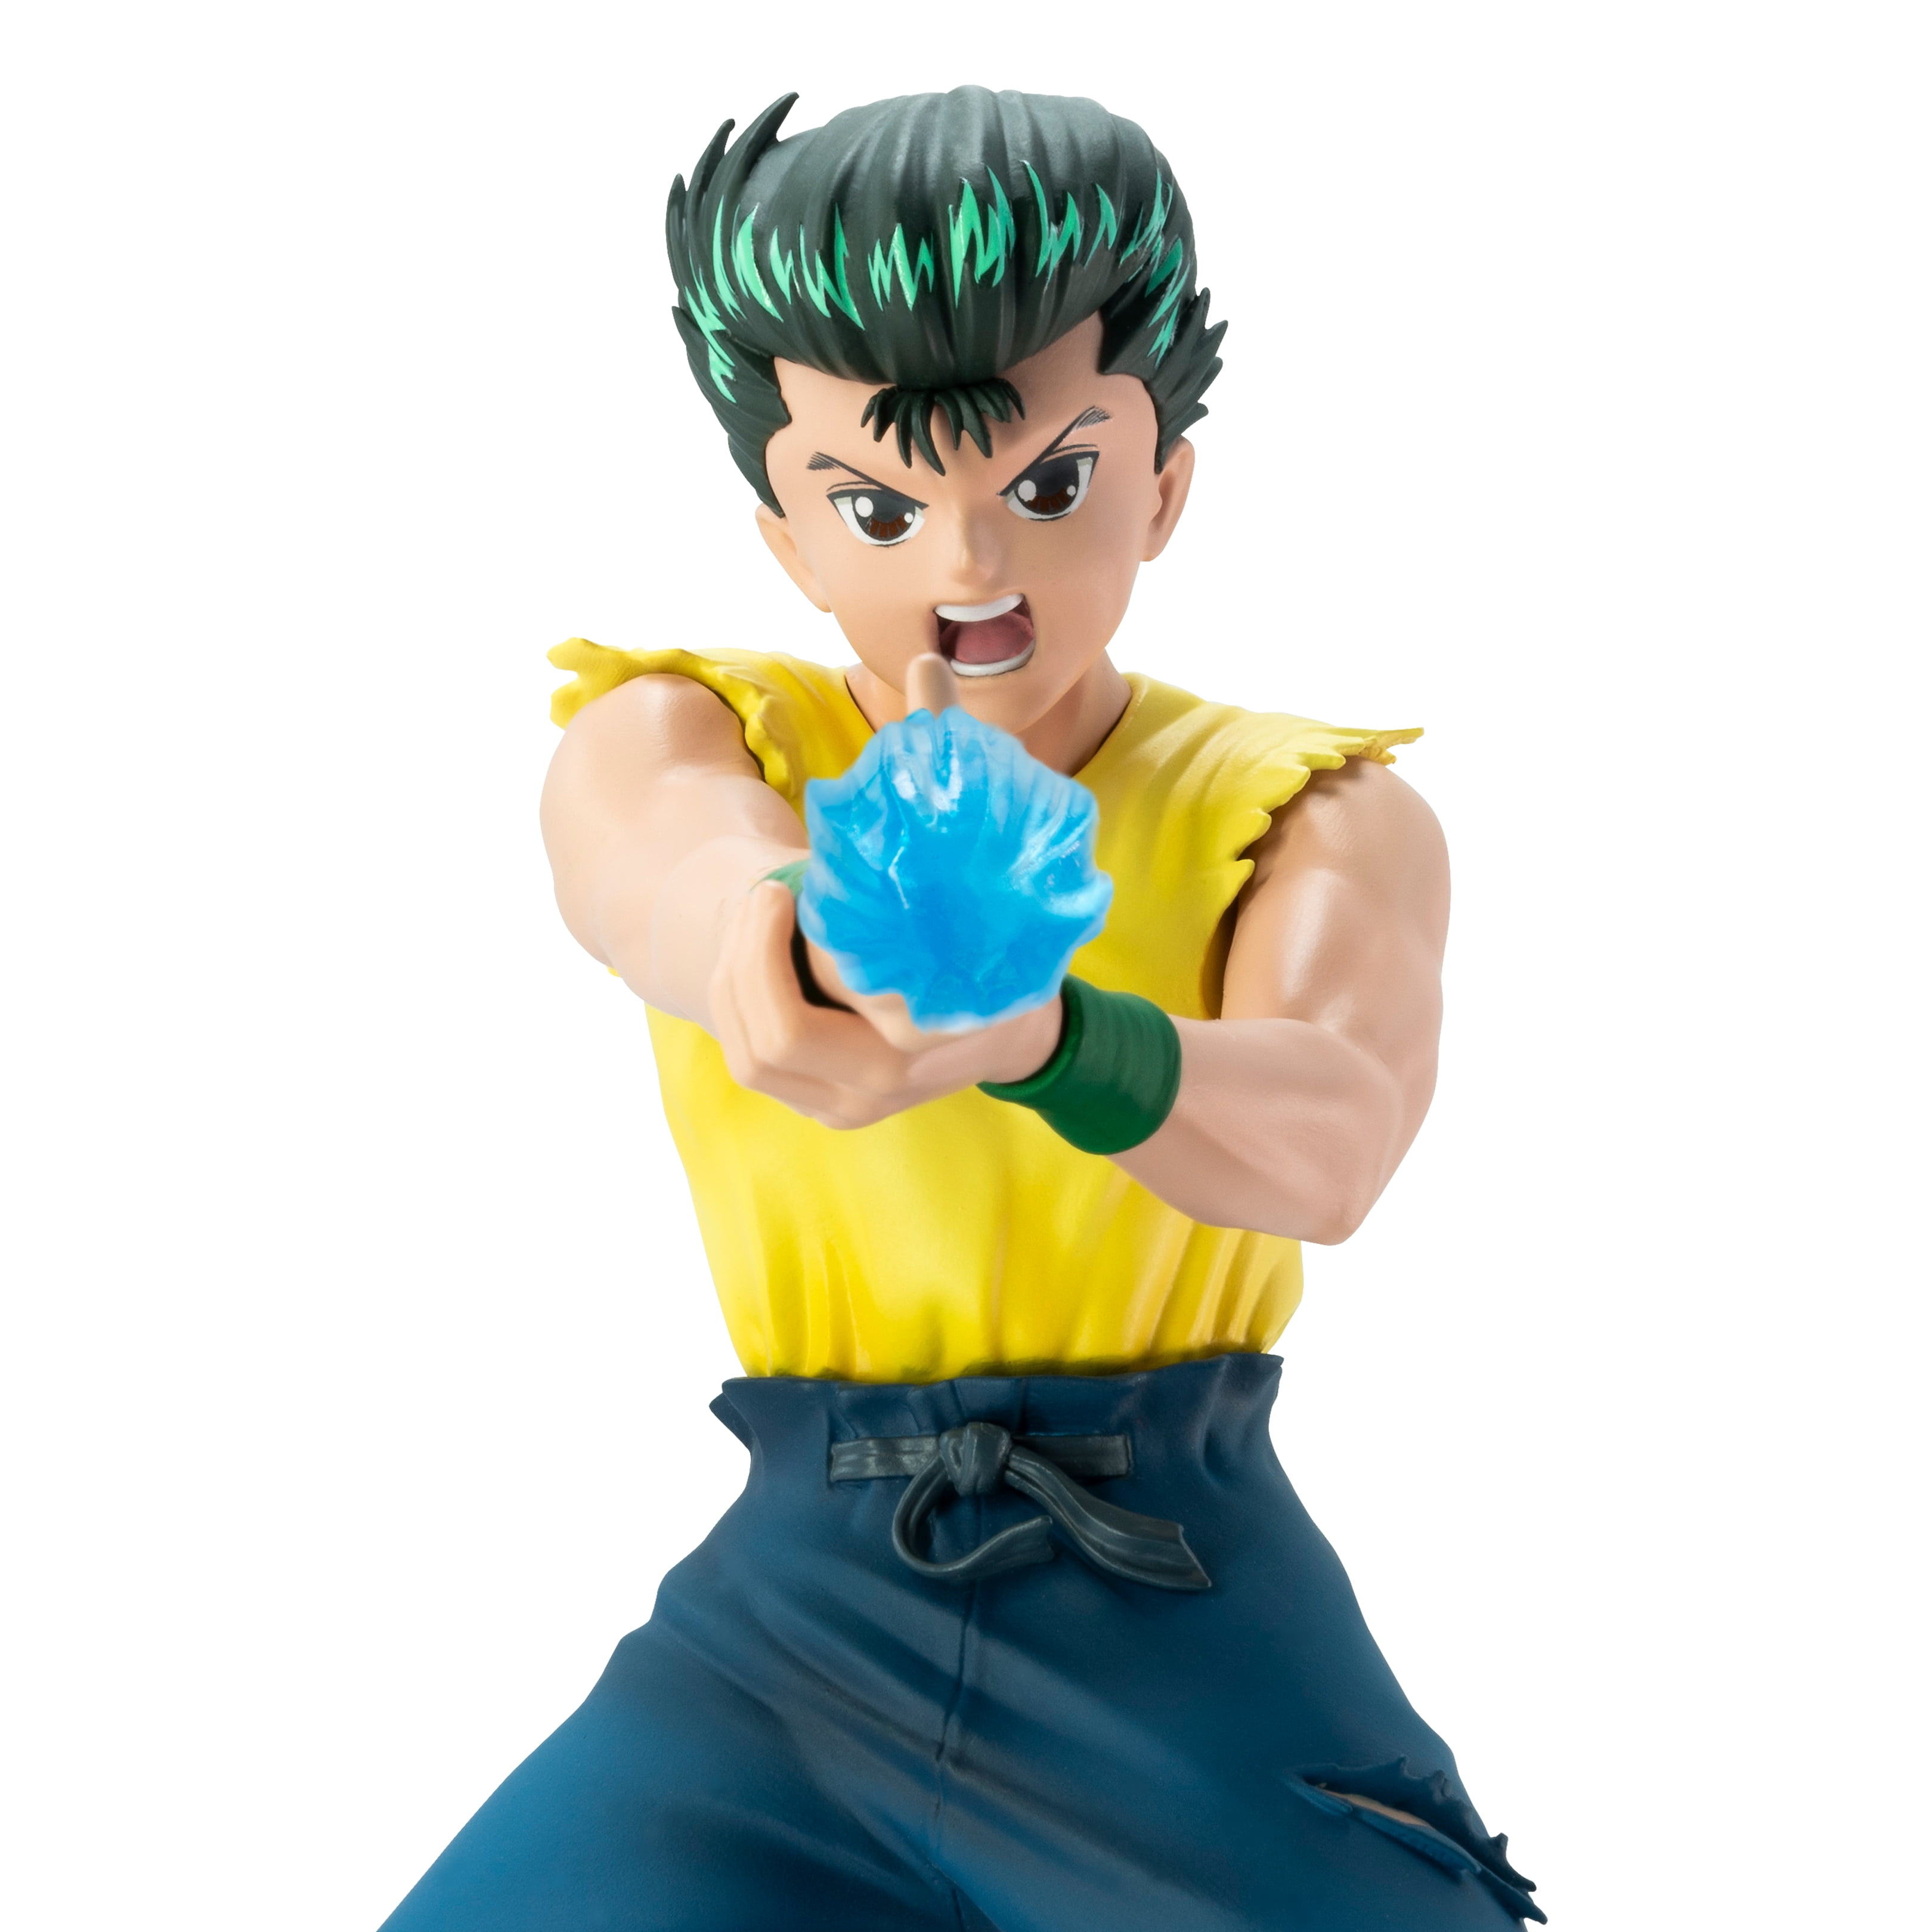  ABYSTYLE Studio Hunter X Hunter Gon SFC Collectible